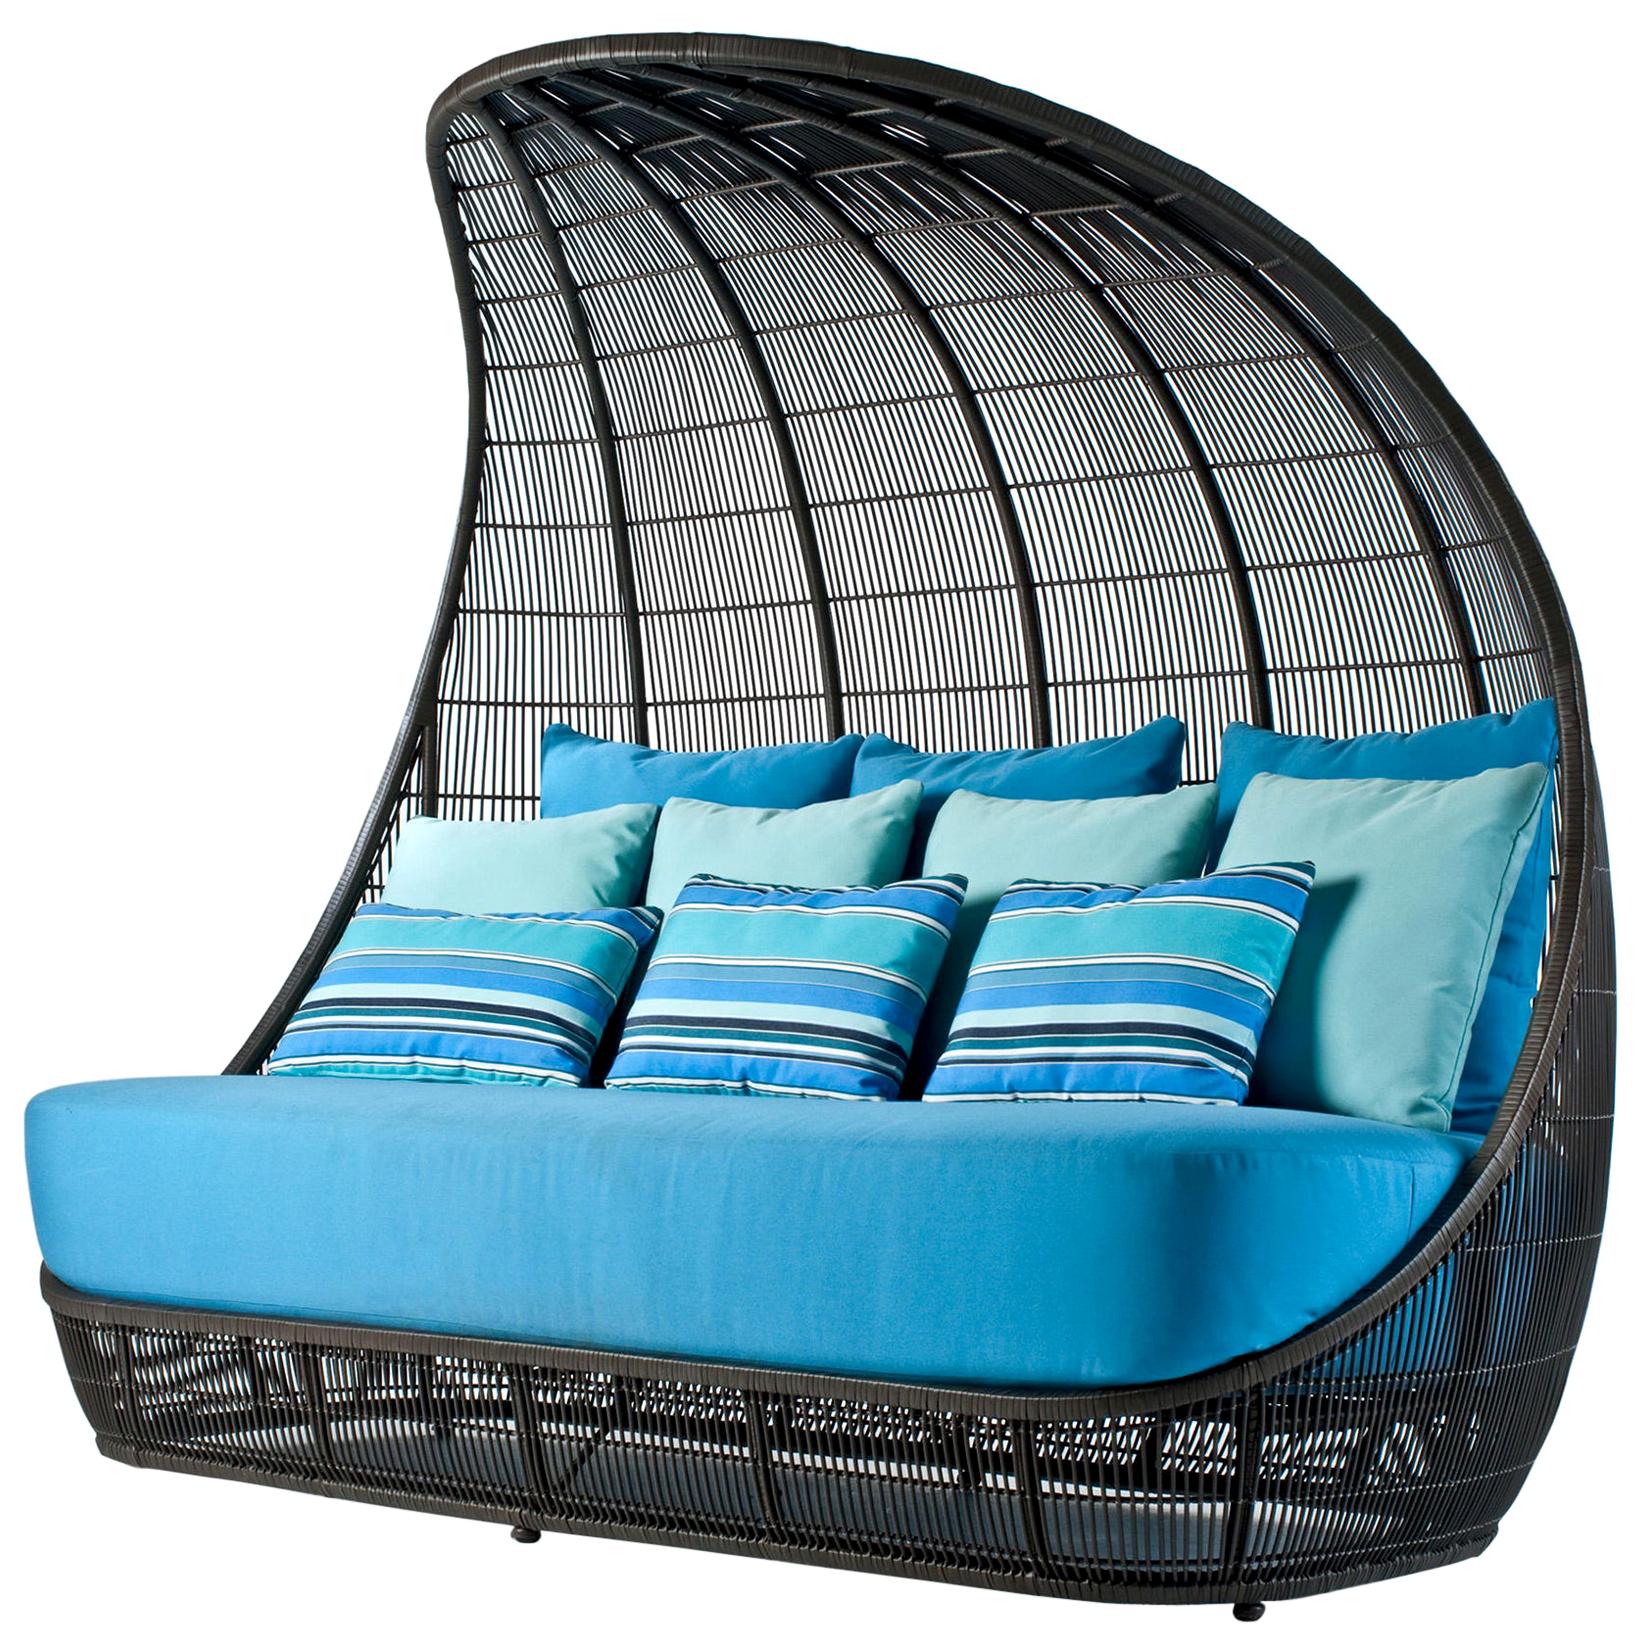 Iguan Daybed For Sale